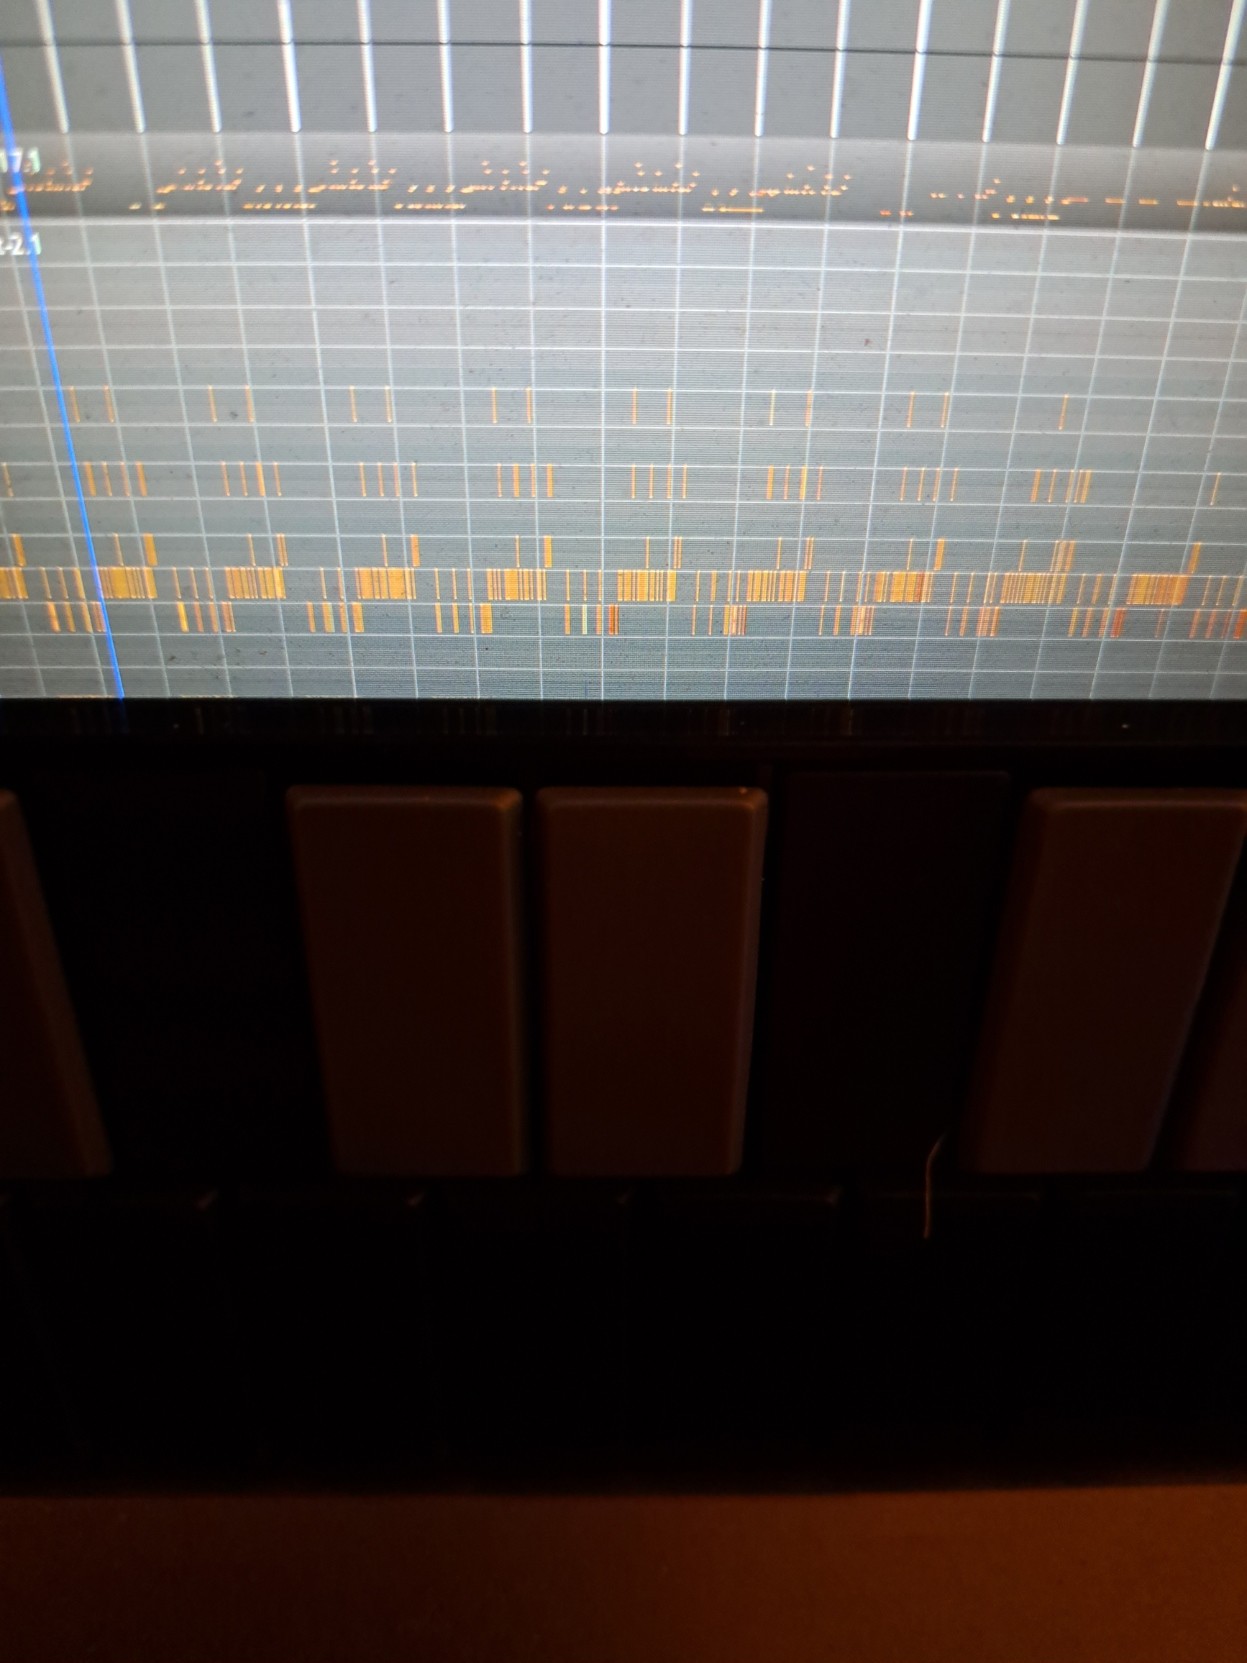 A picture taken in a dark studio, a keyboard in front of the source of light: a screen where ardour can be seen in use, with two midi tracks on it.